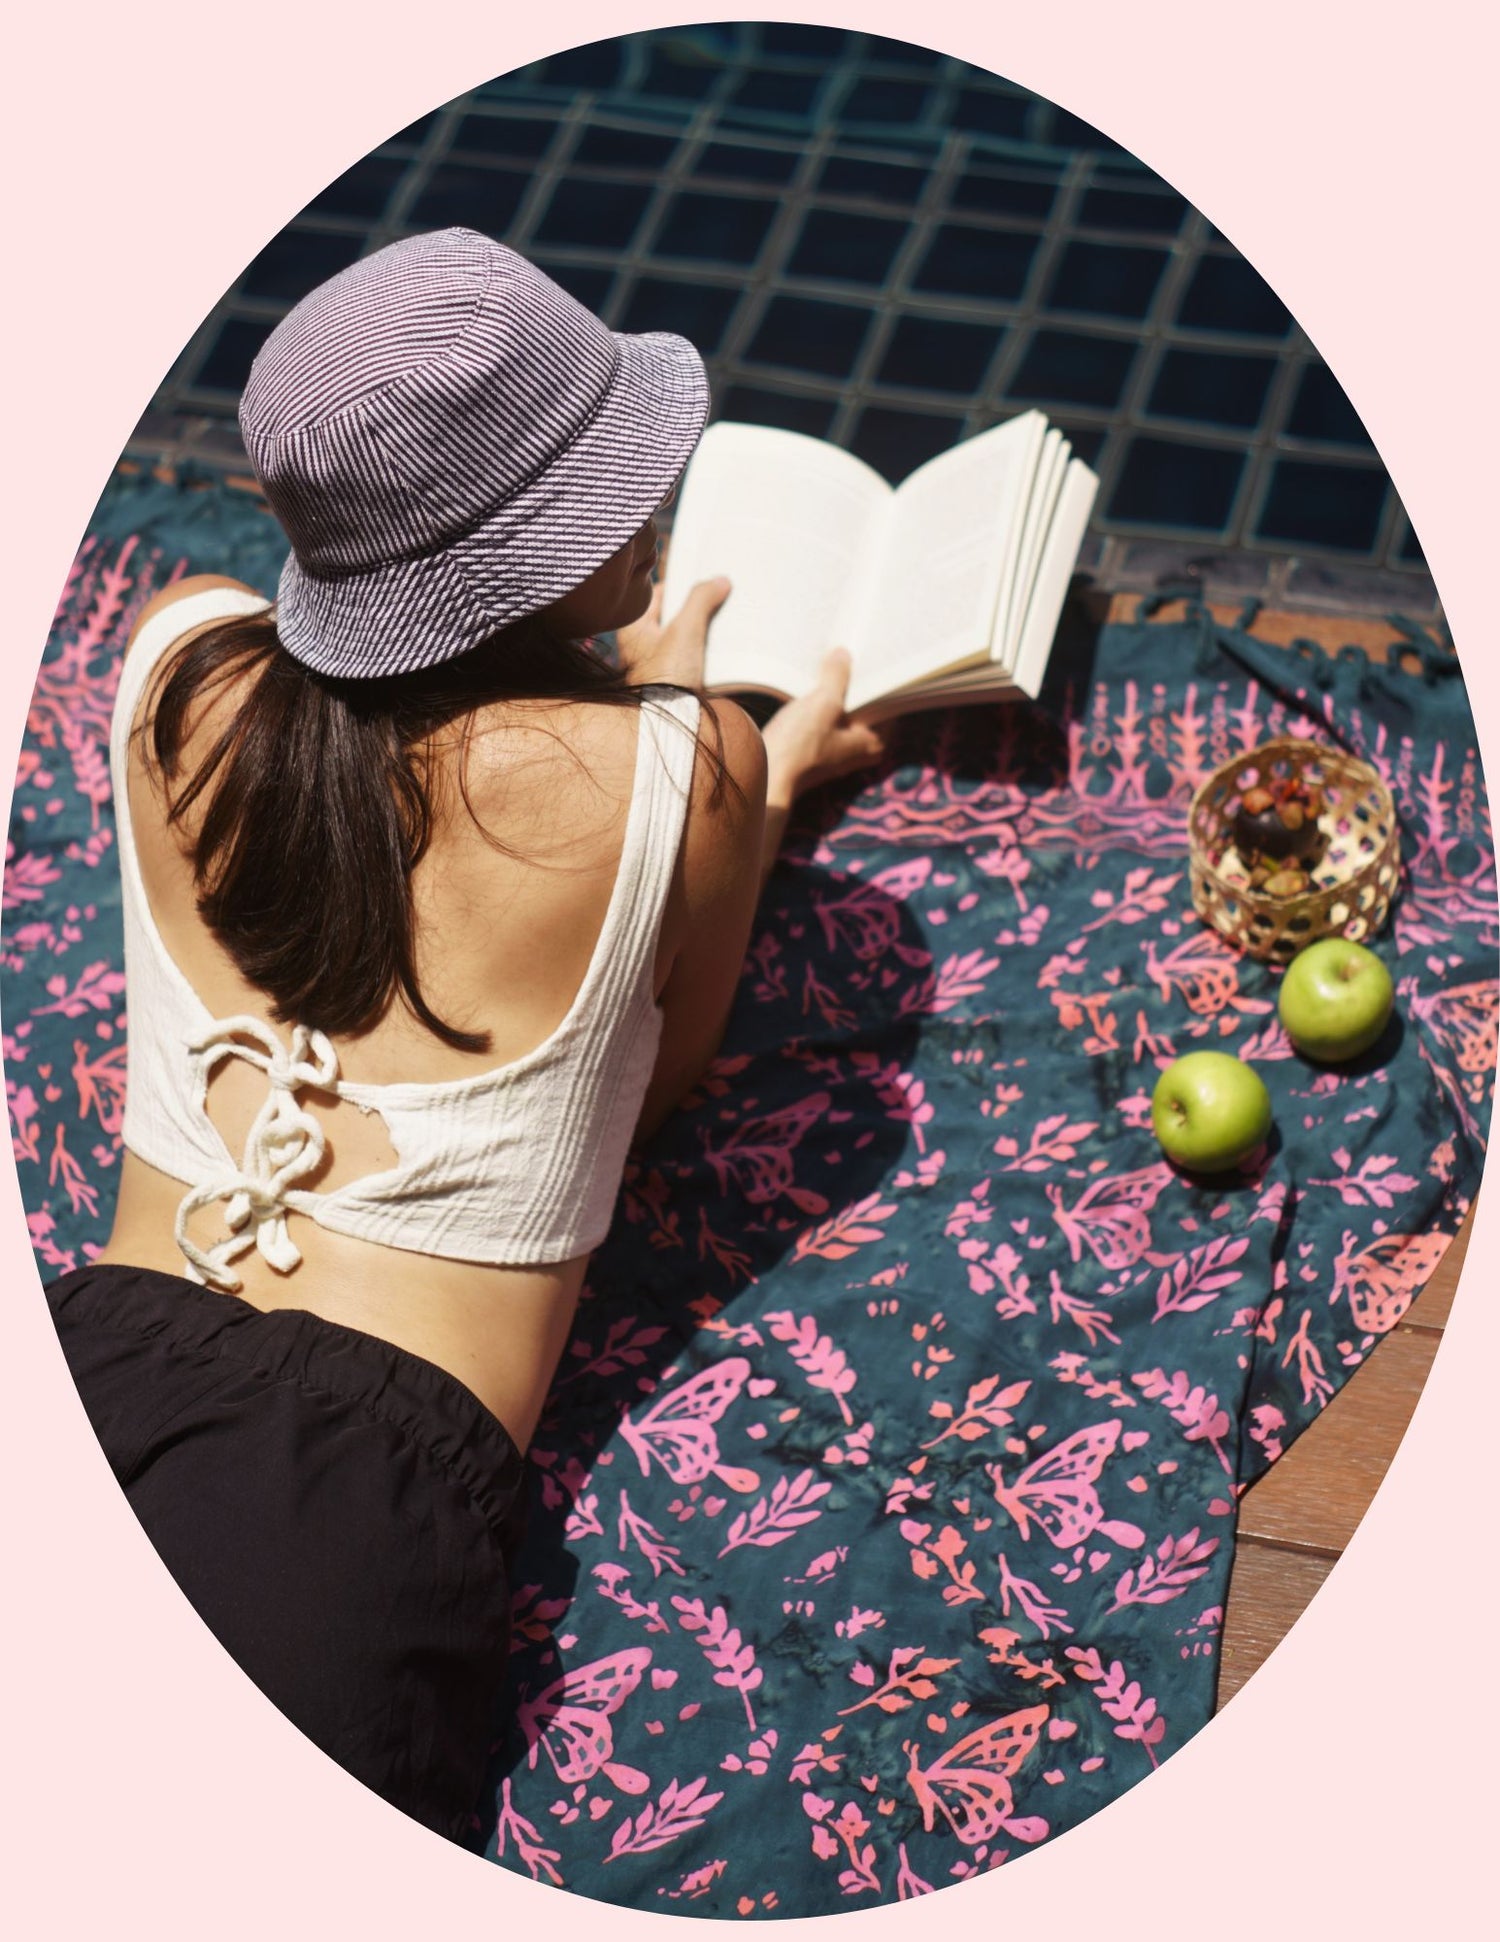 The Butterfly - Dark Slate sarong from YUMI & KORA is used as a pool towel. A woman reads a book on top of the sarong by the pool